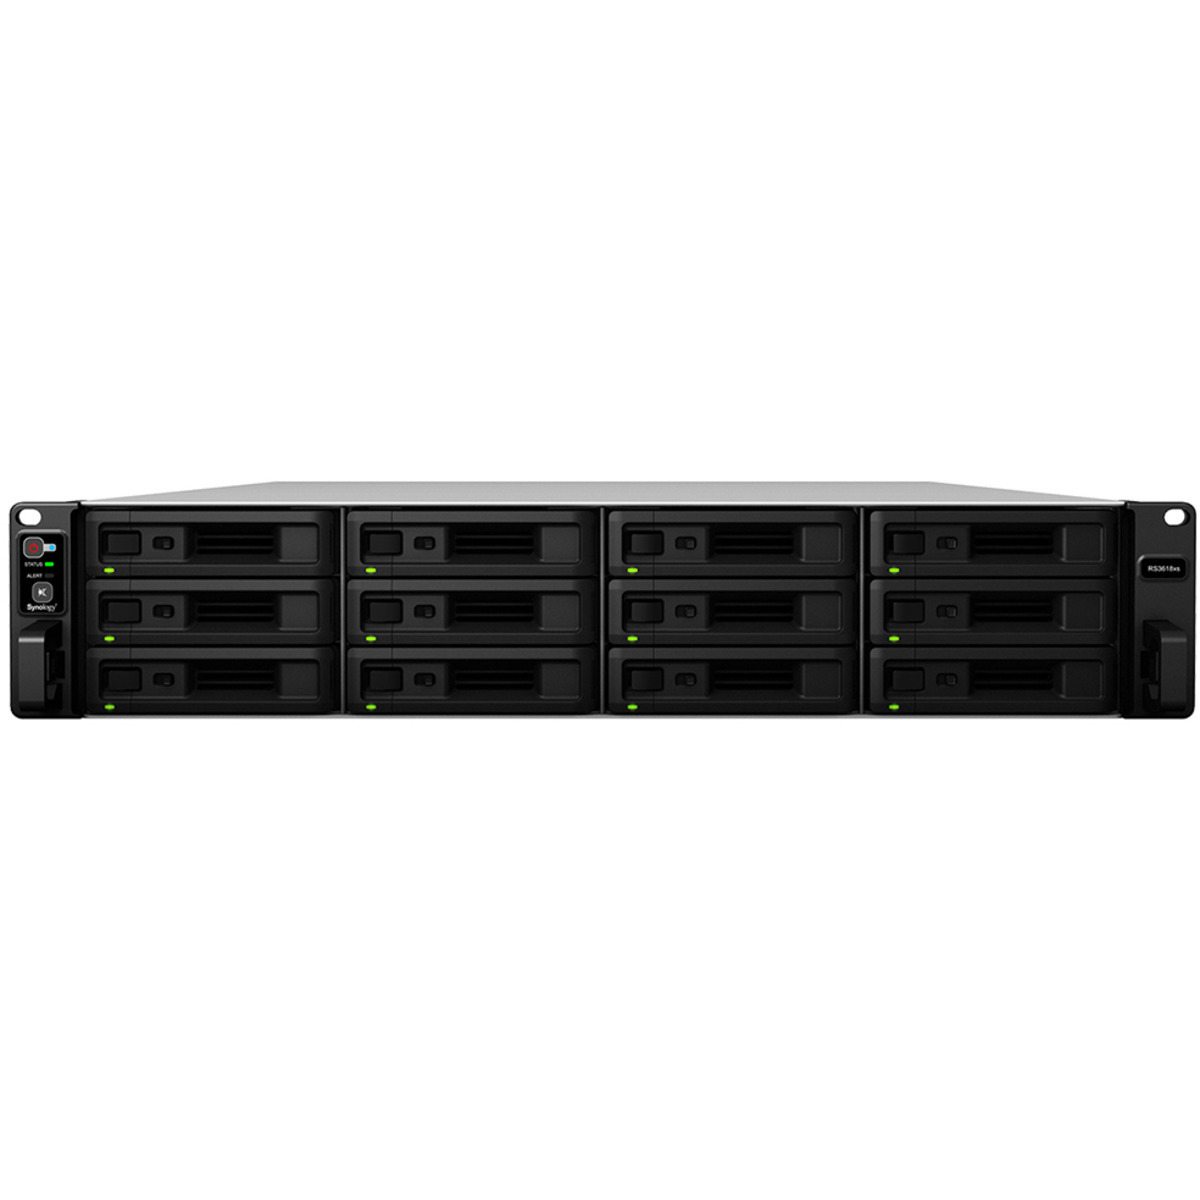 Synology RackStation RS3618xs 84tb 12-Bay RackMount Large Business / Enterprise NAS - Network Attached Storage Device 7x12tb Western Digital Red Pro WD121KFBX 3.5 7200rpm SATA 6Gb/s HDD NAS Class Drives Installed - Burn-In Tested RackStation RS3618xs